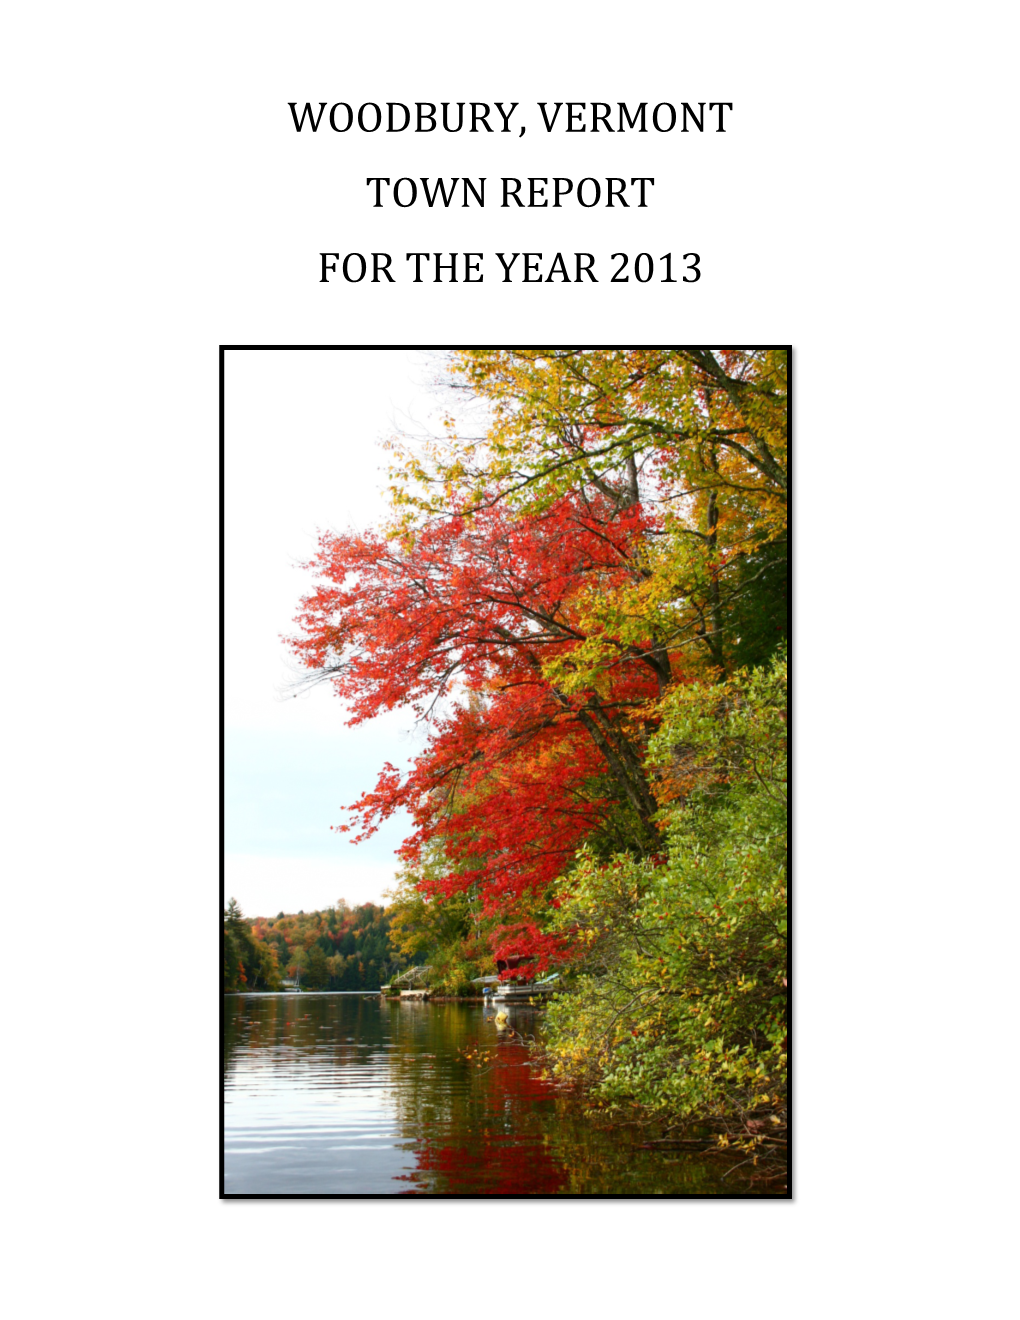 Woodbury, Vermont Town Report for the Year 2013